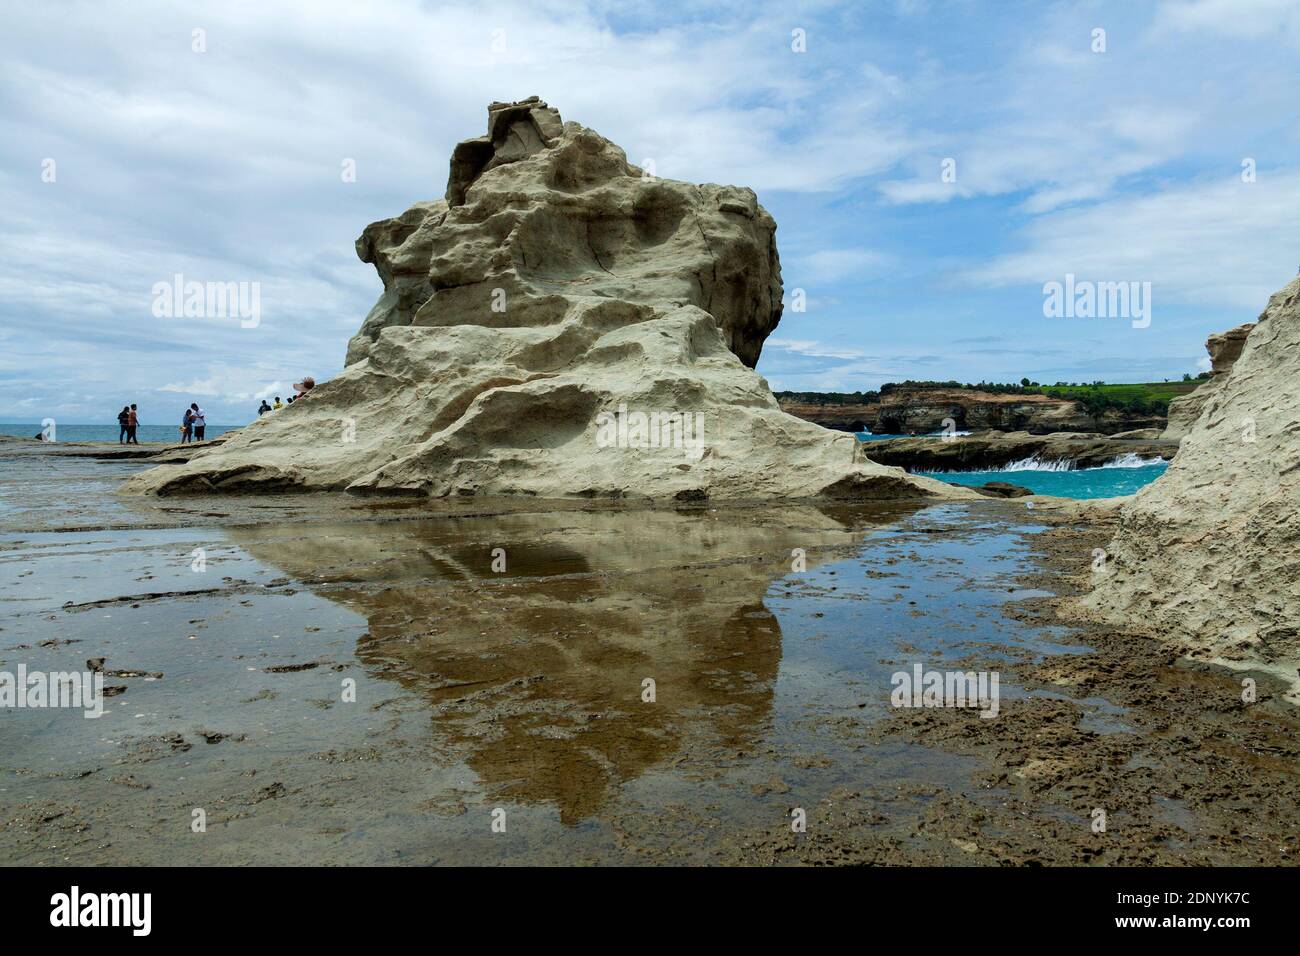 Klayar Beach is one of the tourist destinations in Pacitan district, East Java. Stock Photo